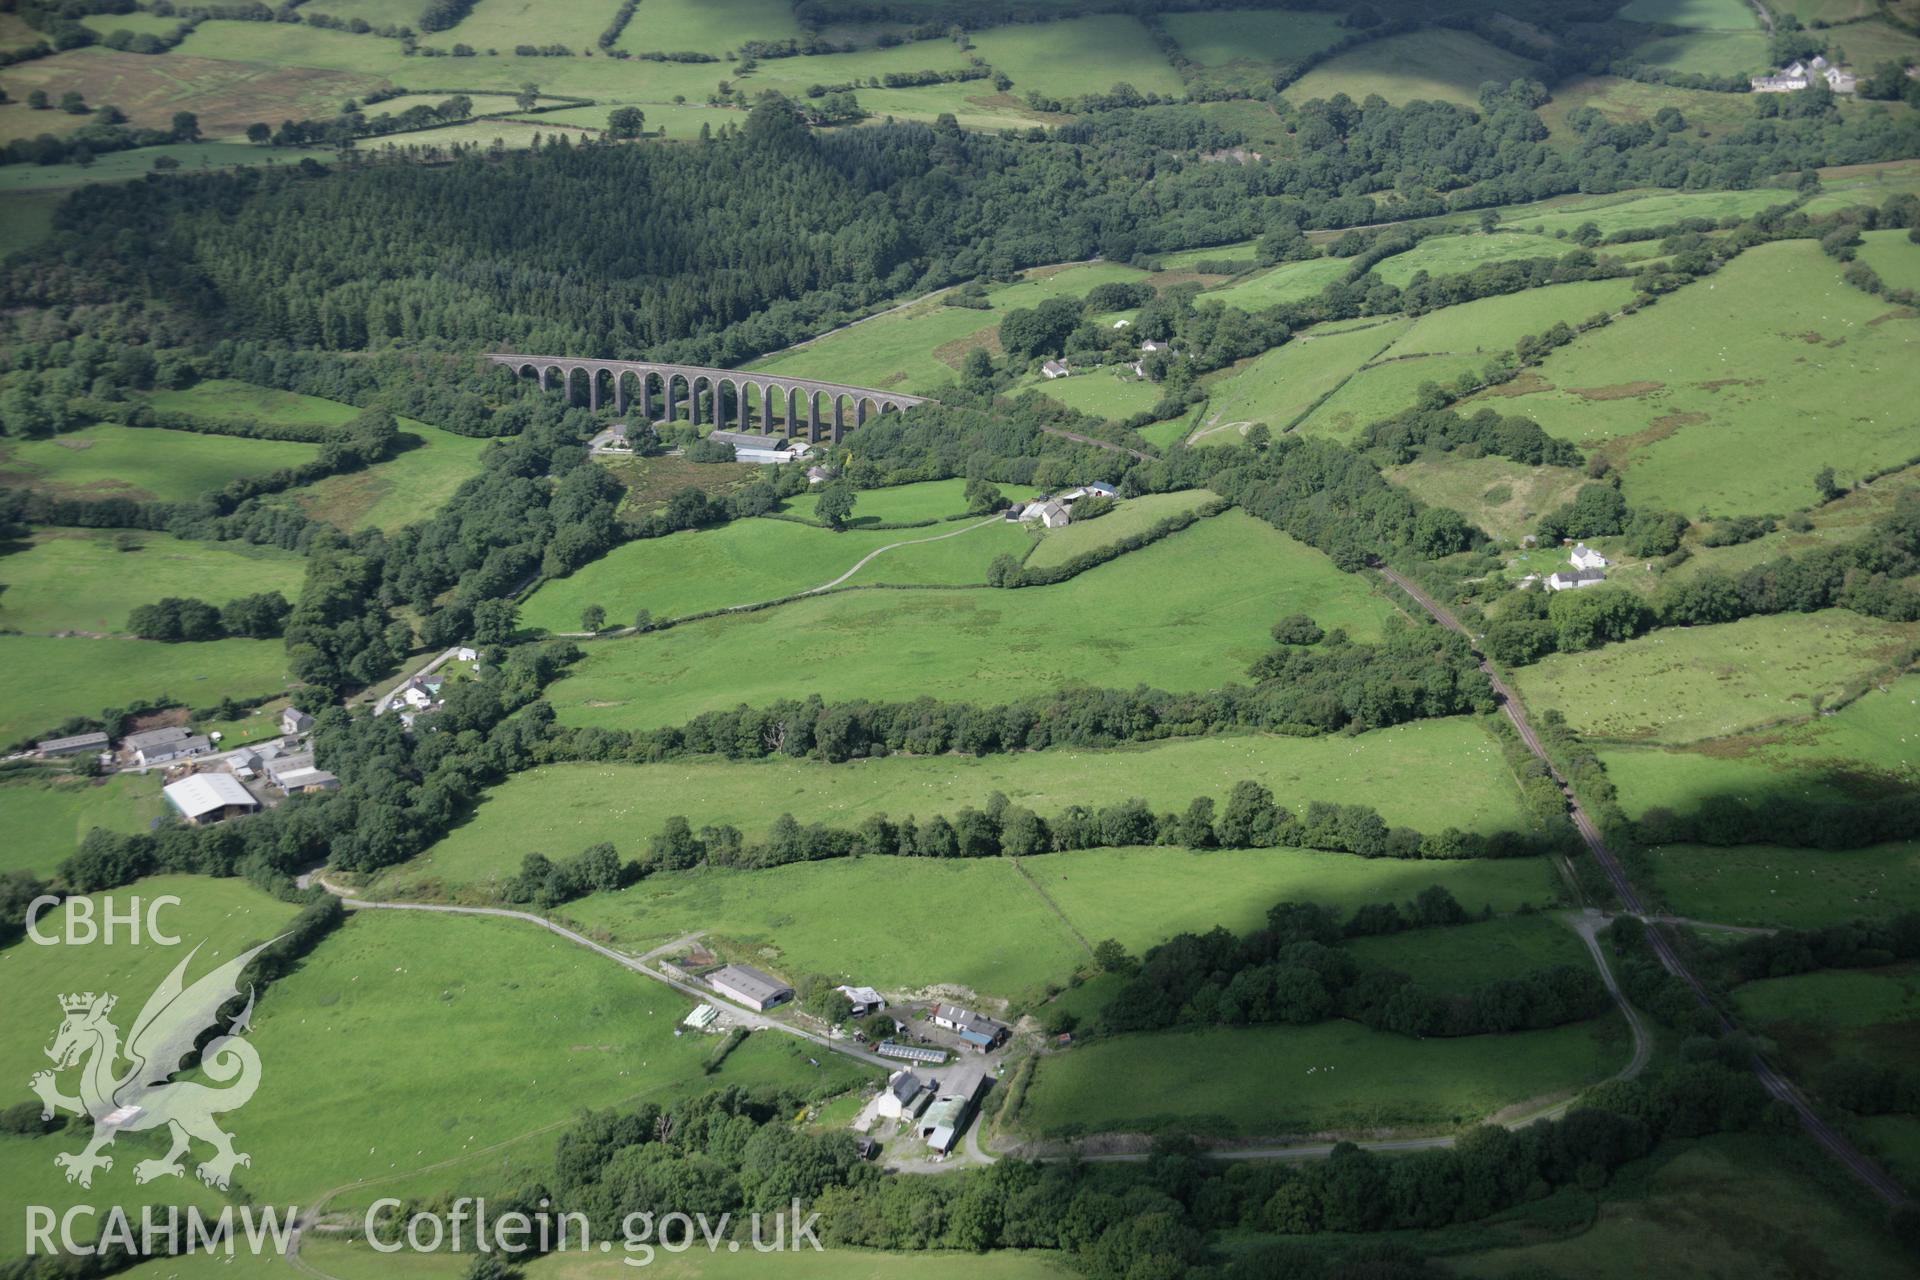 RCAHMW colour oblique aerial photograph of Cynghordy Railway Viaduct. A long view from the east showing it in its landscape. Taken on 02 September 2005 by Toby Driver